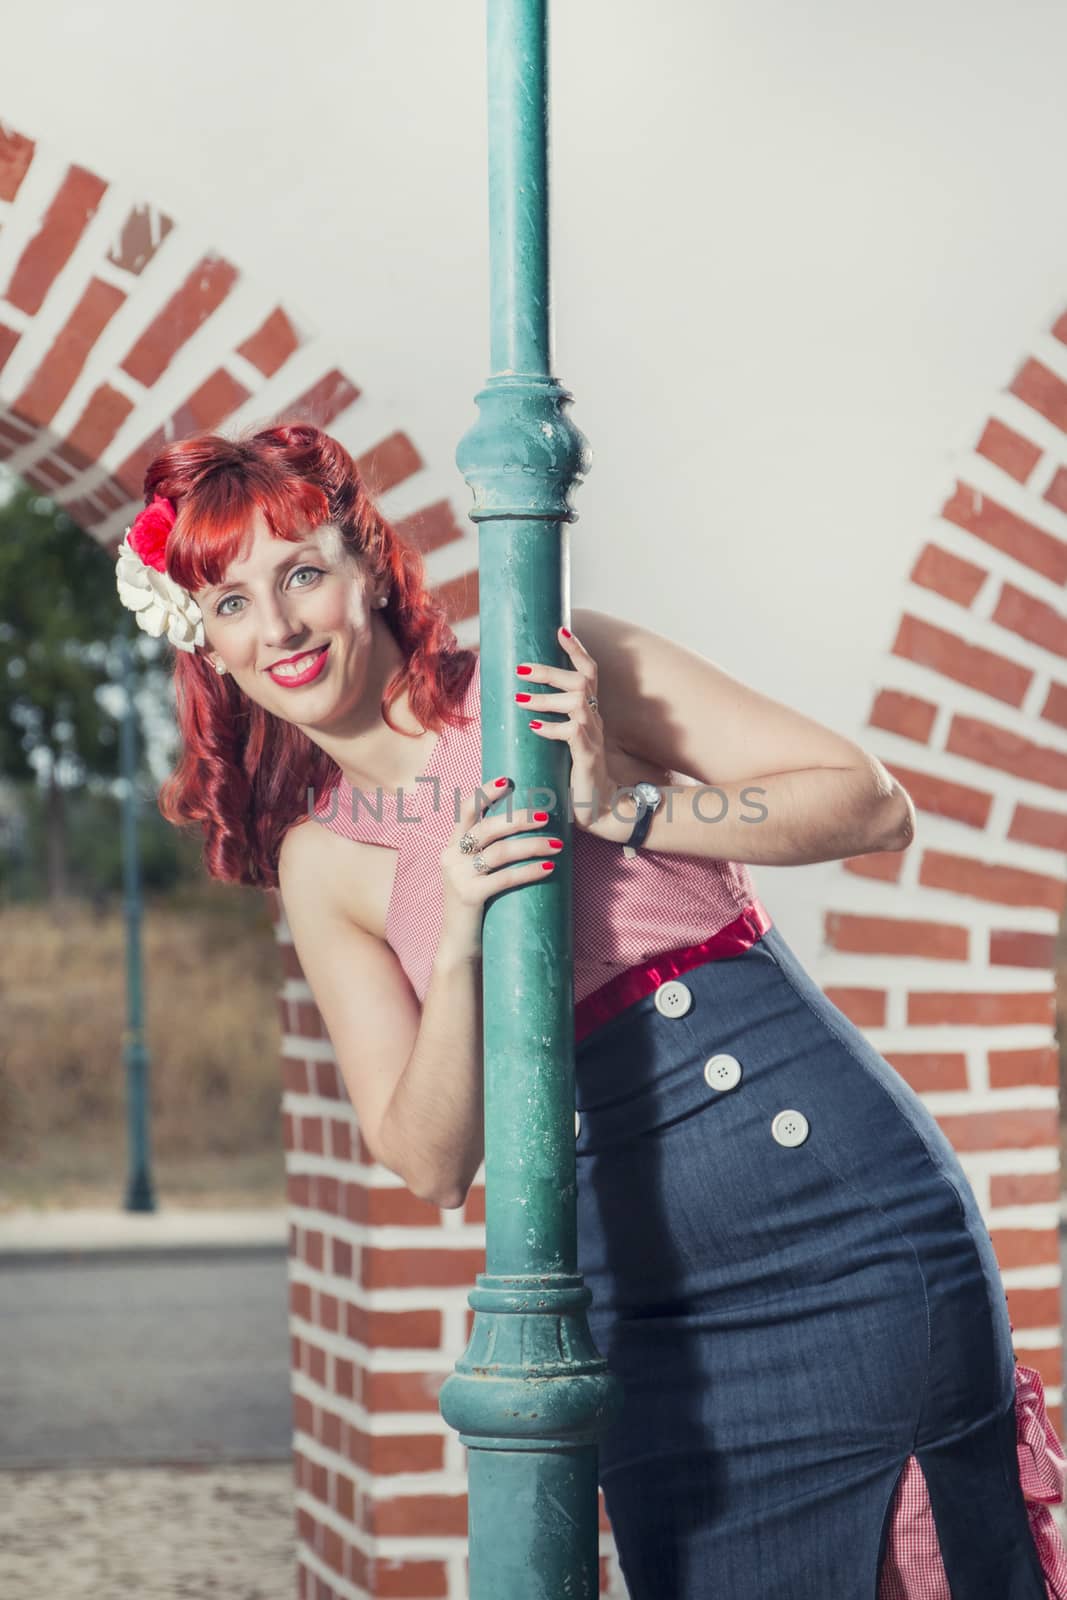 View of pinup young woman in vintage style clothing peeking on a playful way.